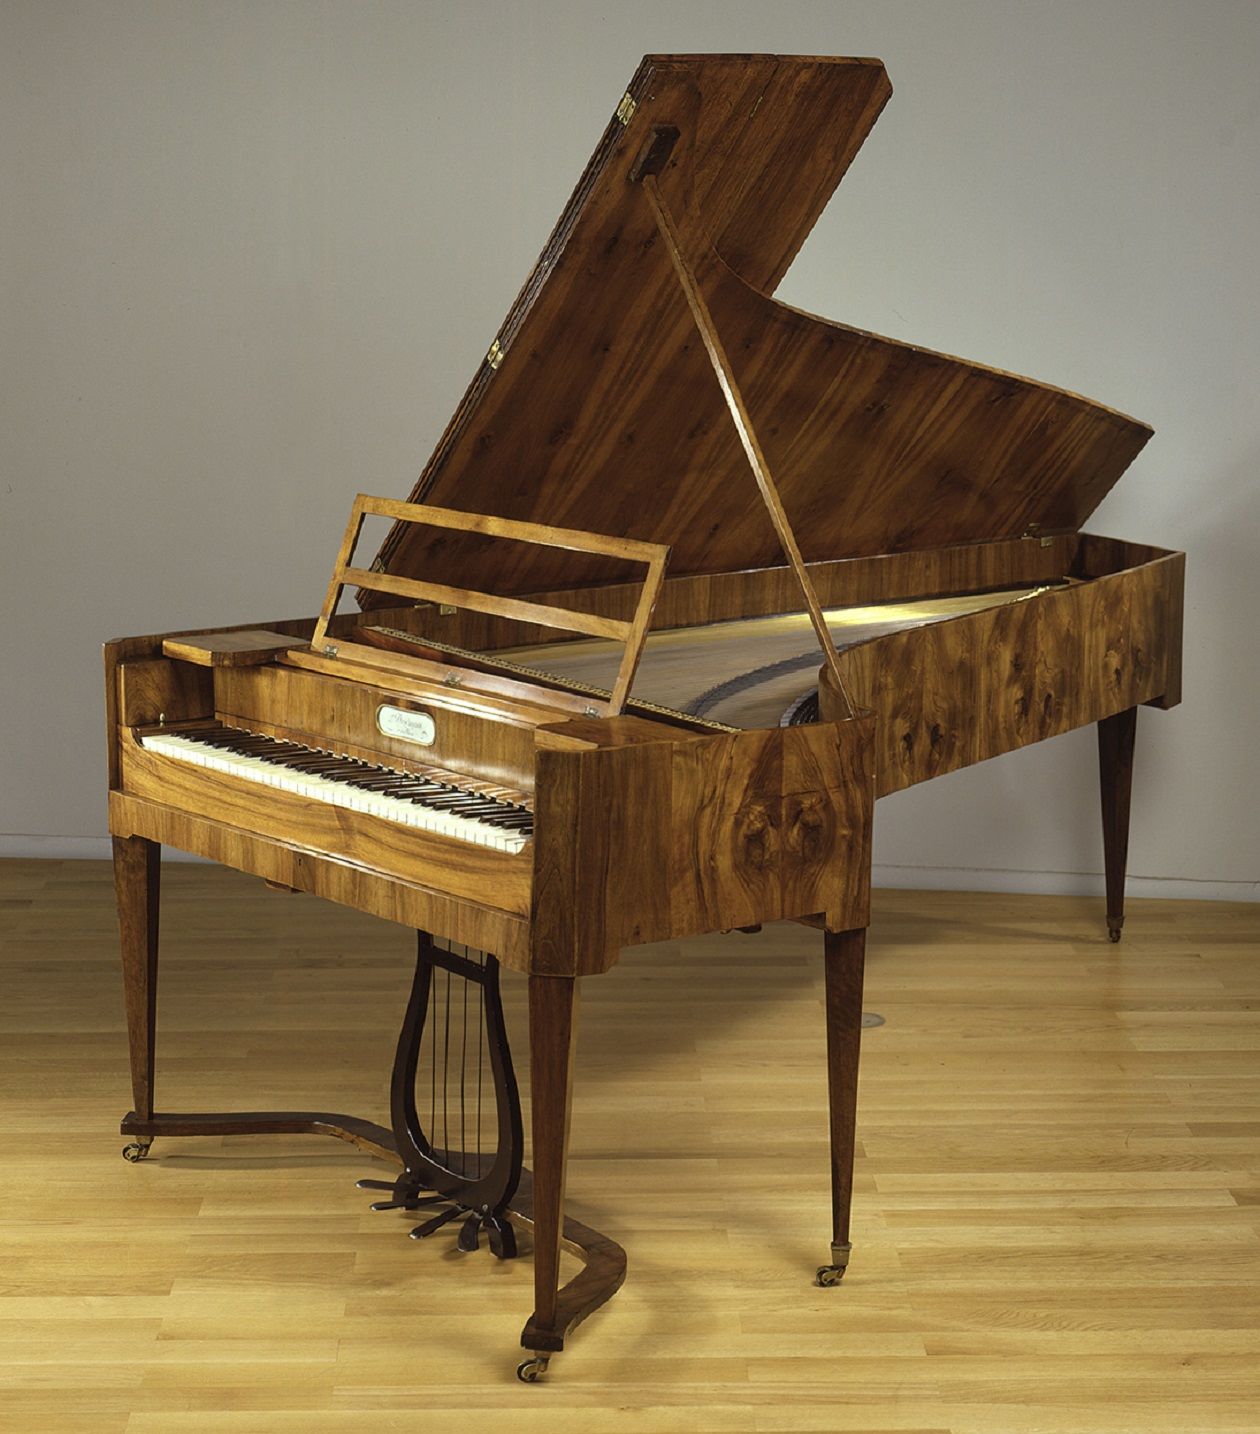 Fortepiano owned by Carl Maria von Weber